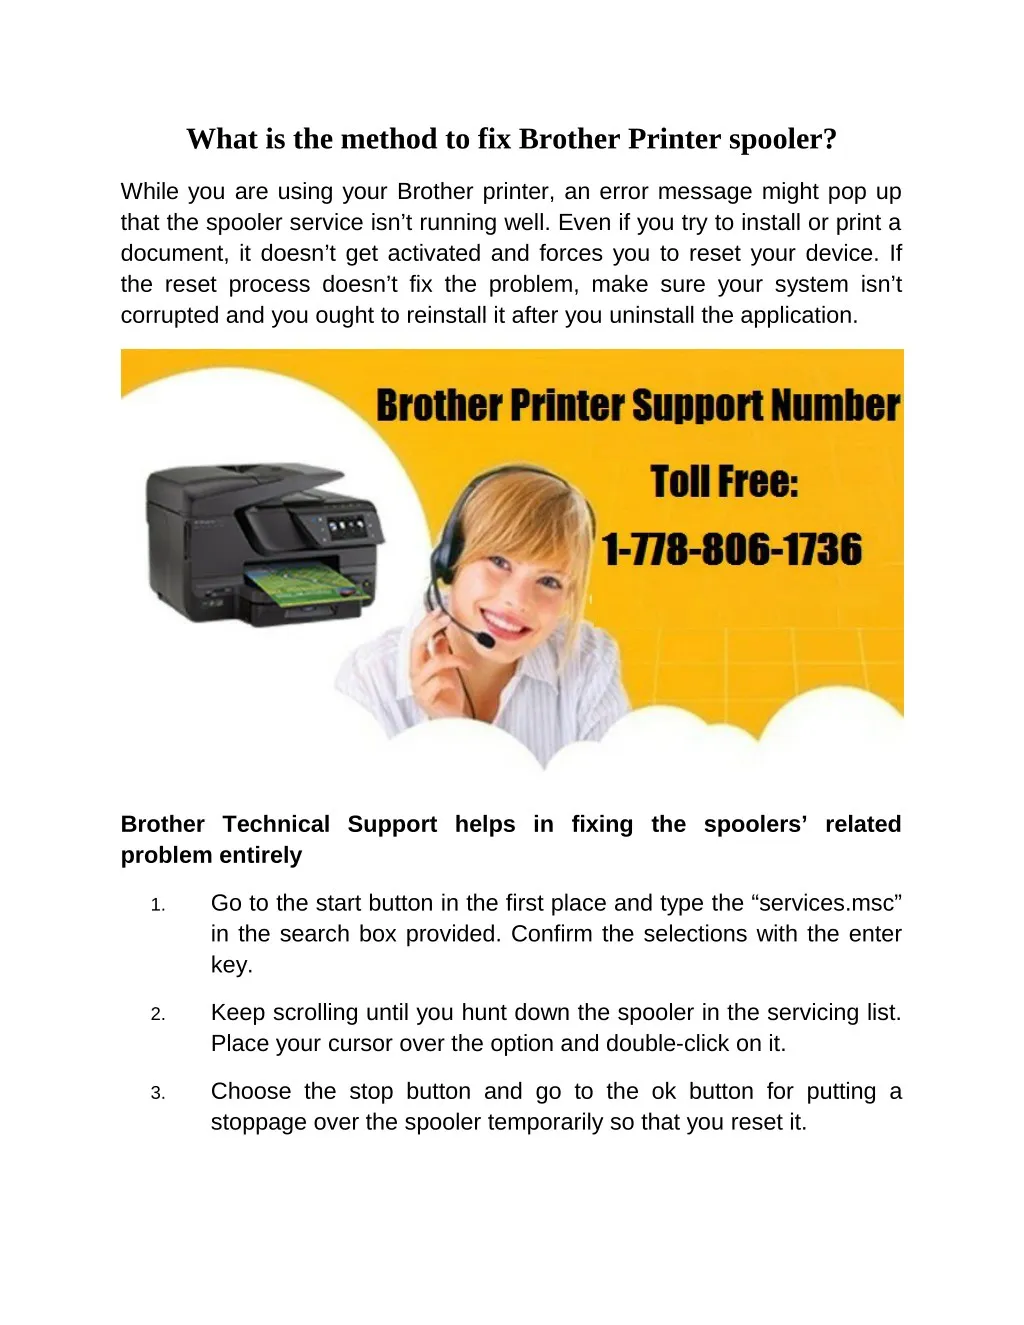 what is the method to fix brother printer spooler